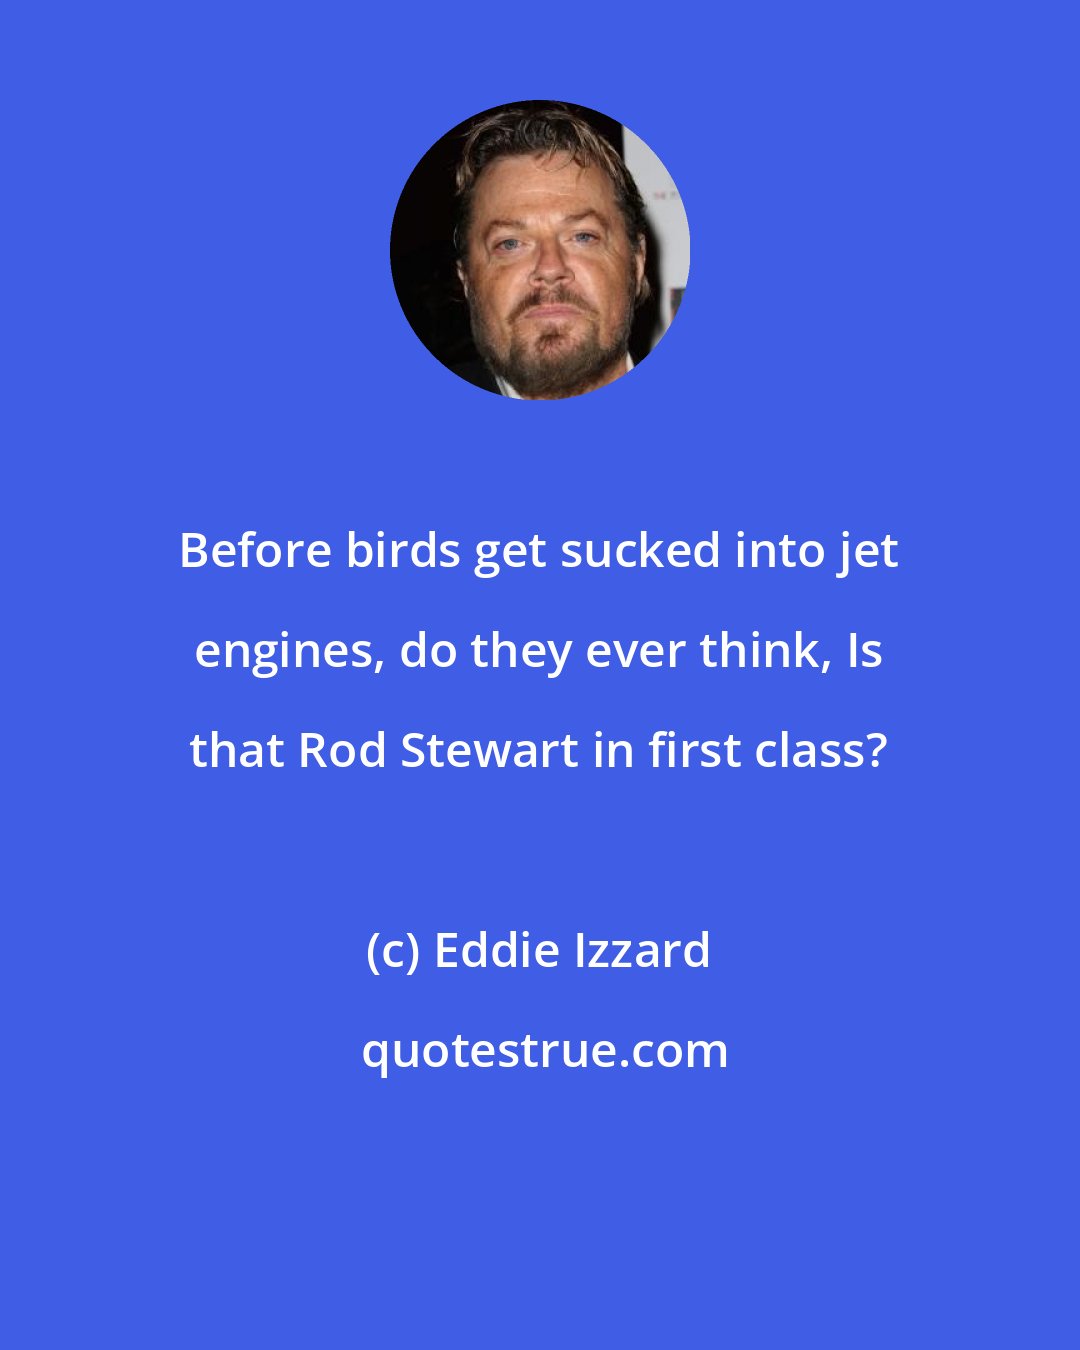 Eddie Izzard: Before birds get sucked into jet engines, do they ever think, Is that Rod Stewart in first class?